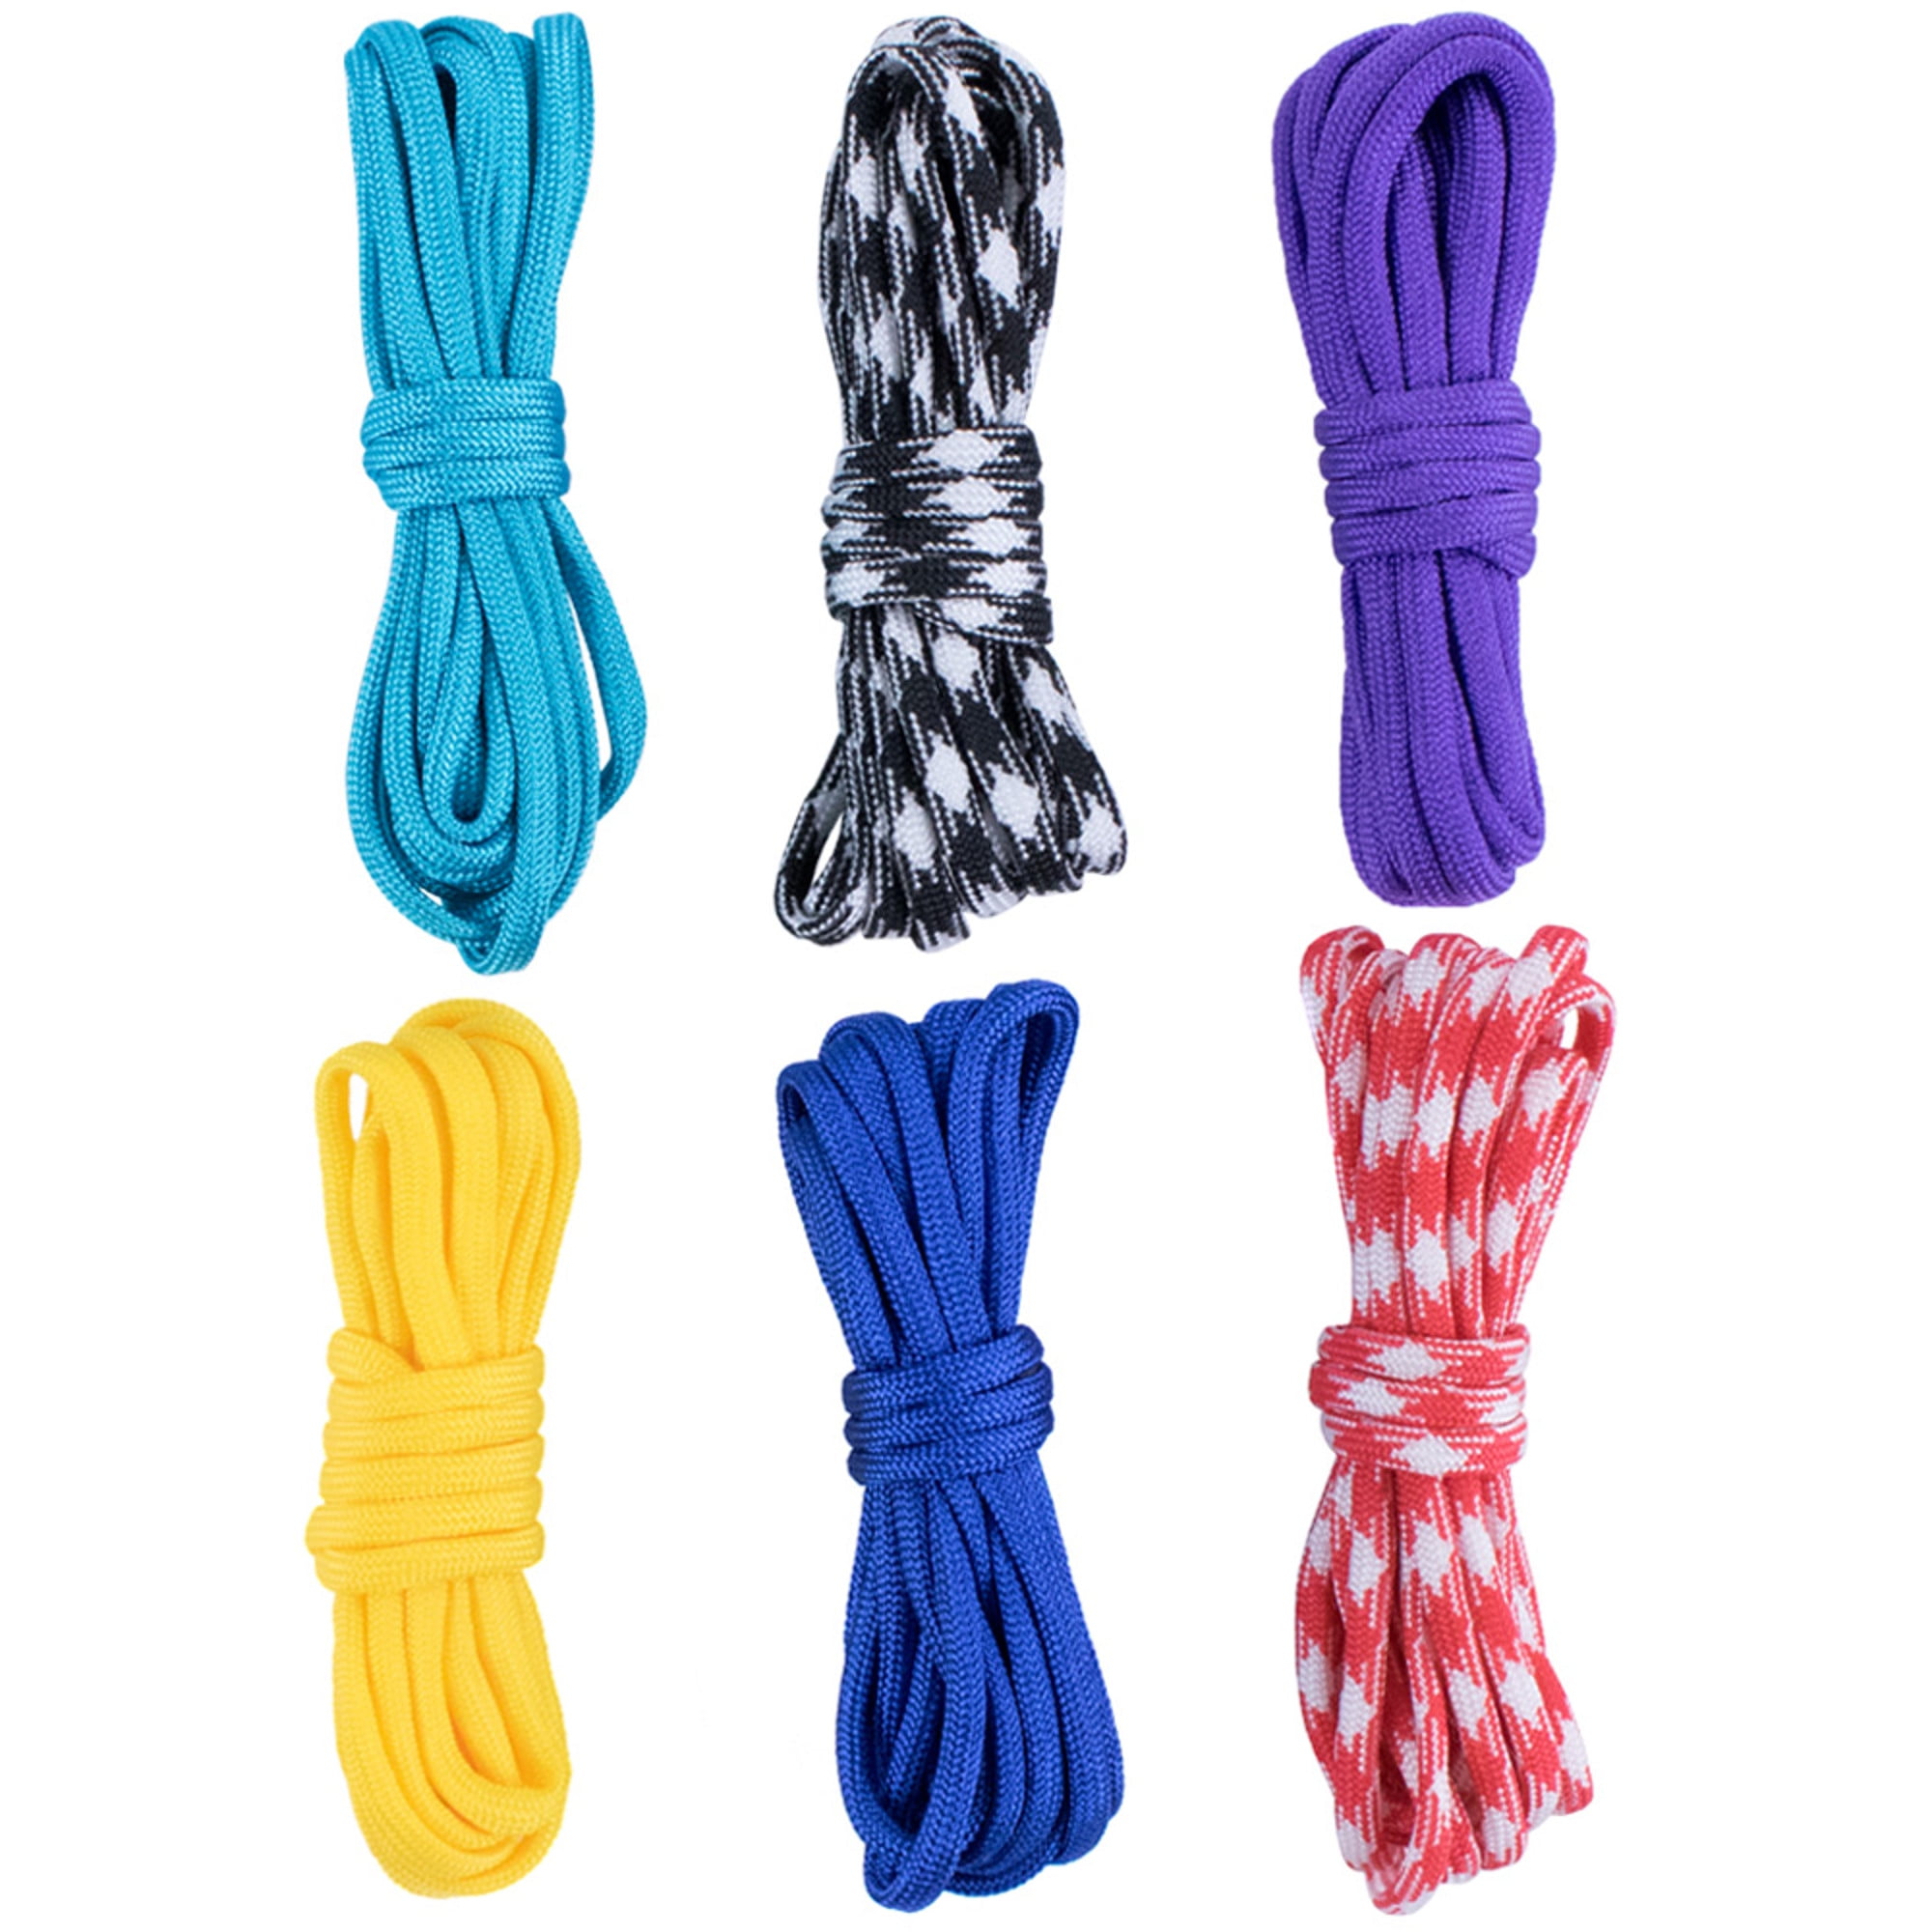 Incraftables Paracord kit with 15 Colors Paracord Rope (2mm), Buckle,  Keyring, Carabiner & More. Best Paracord Bracelet Making Set for Lanyards,  Dog Collars, Parachute Cord & Survival Rope